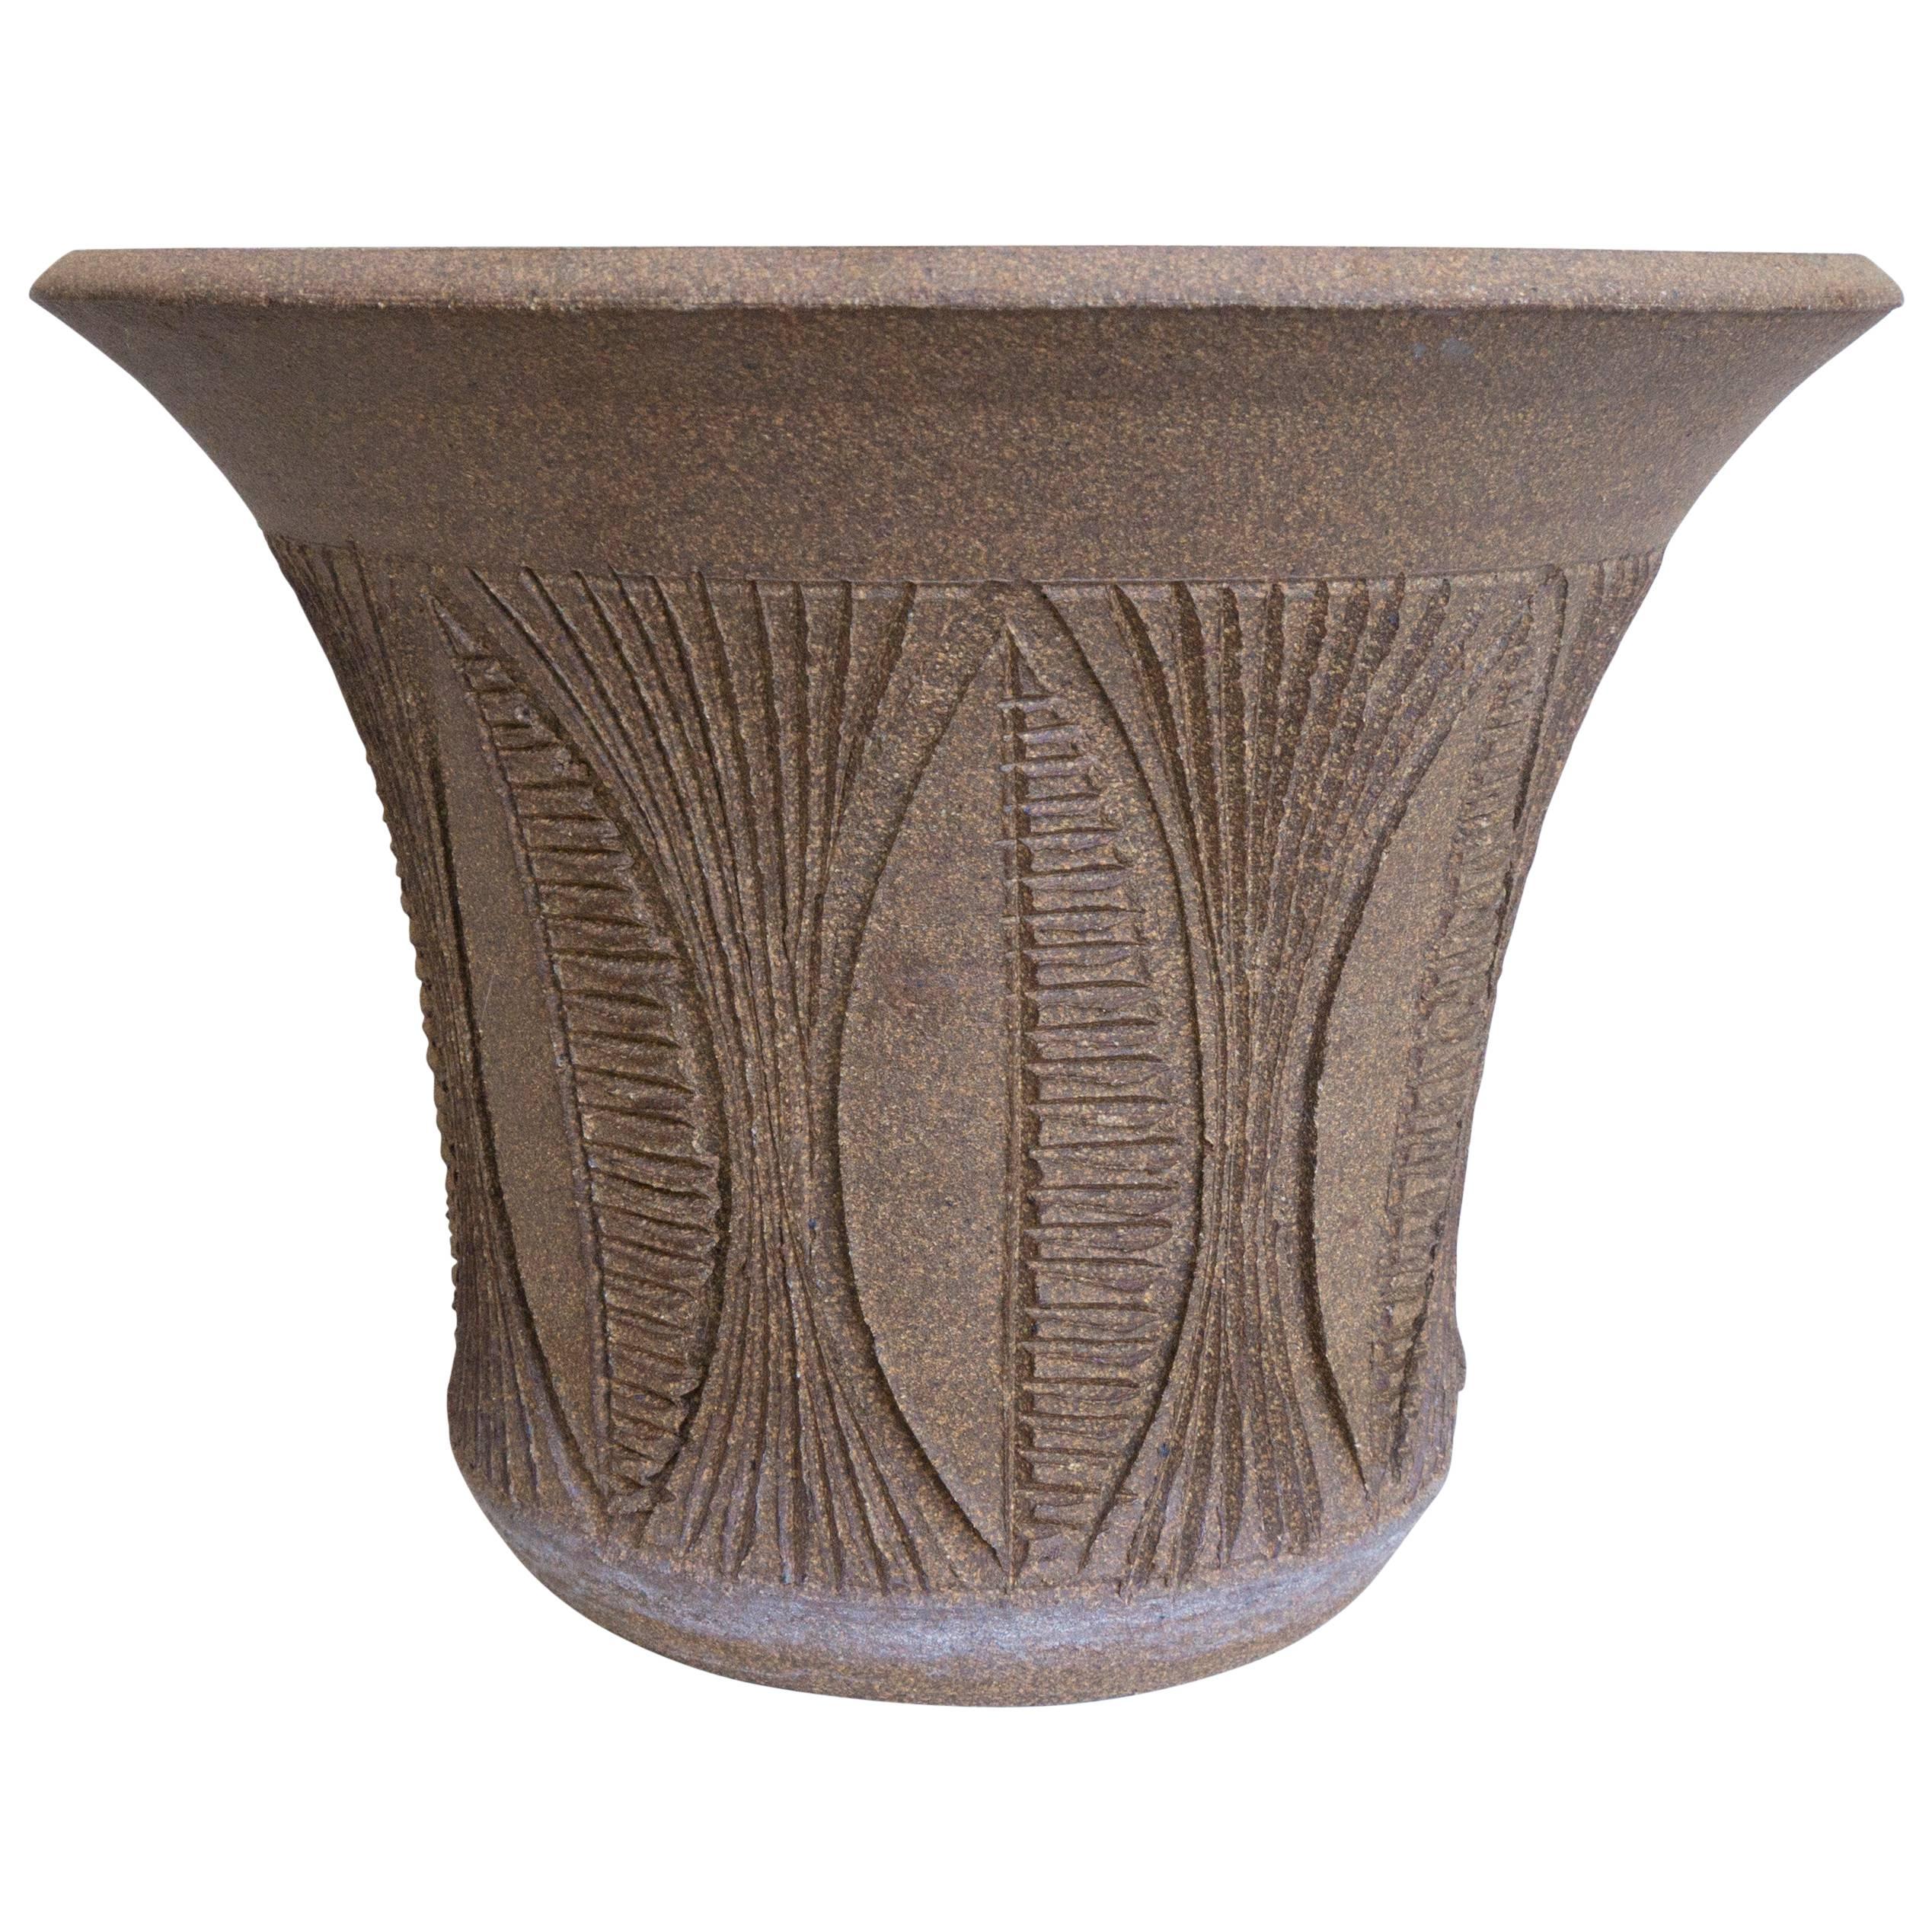 A small and detailed vessel, this handmade Maxwell has a rarely seen leaf design incised in the earth gender style clay. The inverted bell shape planter has a drain hole and is attention grabbing in a room. Certain to increase in value if cared for,